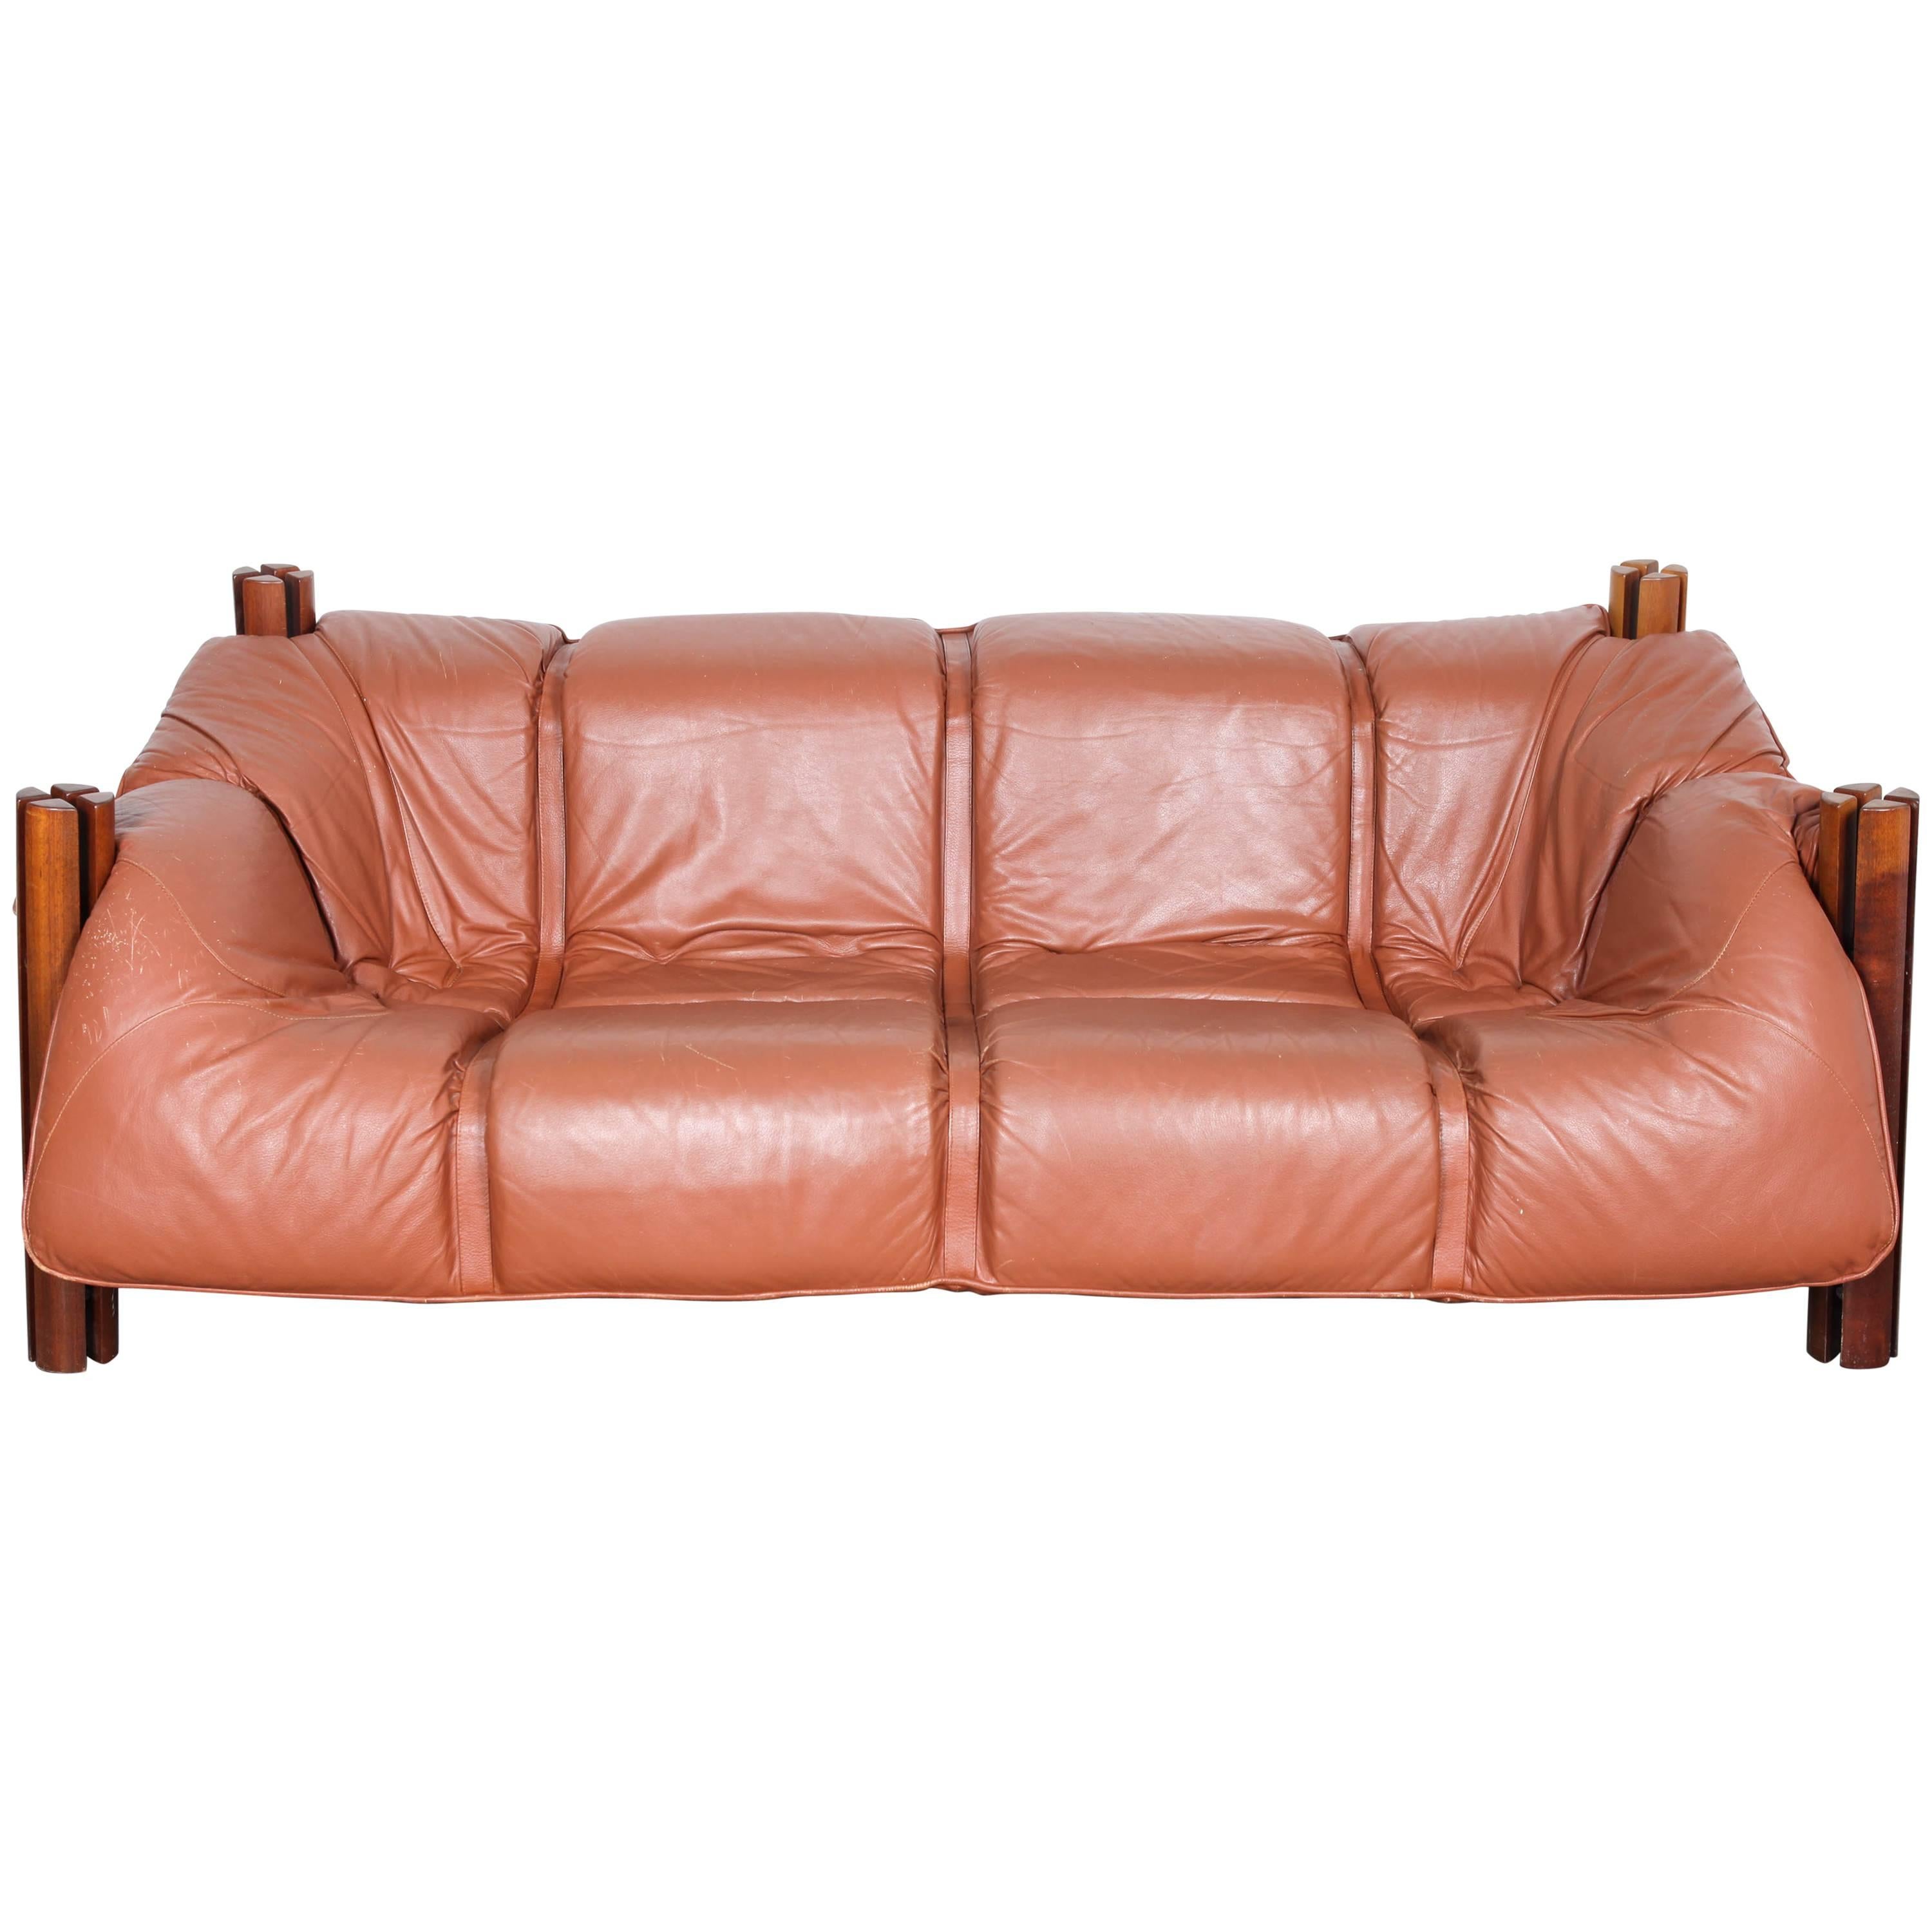 Percival Lafer, MP-211 sofa supported by round quarter-split posts. This piece has a singular leather cushion which conforms around the frame. Matching two-seat and lounge chair also offered. Please see Midcenturyla store.